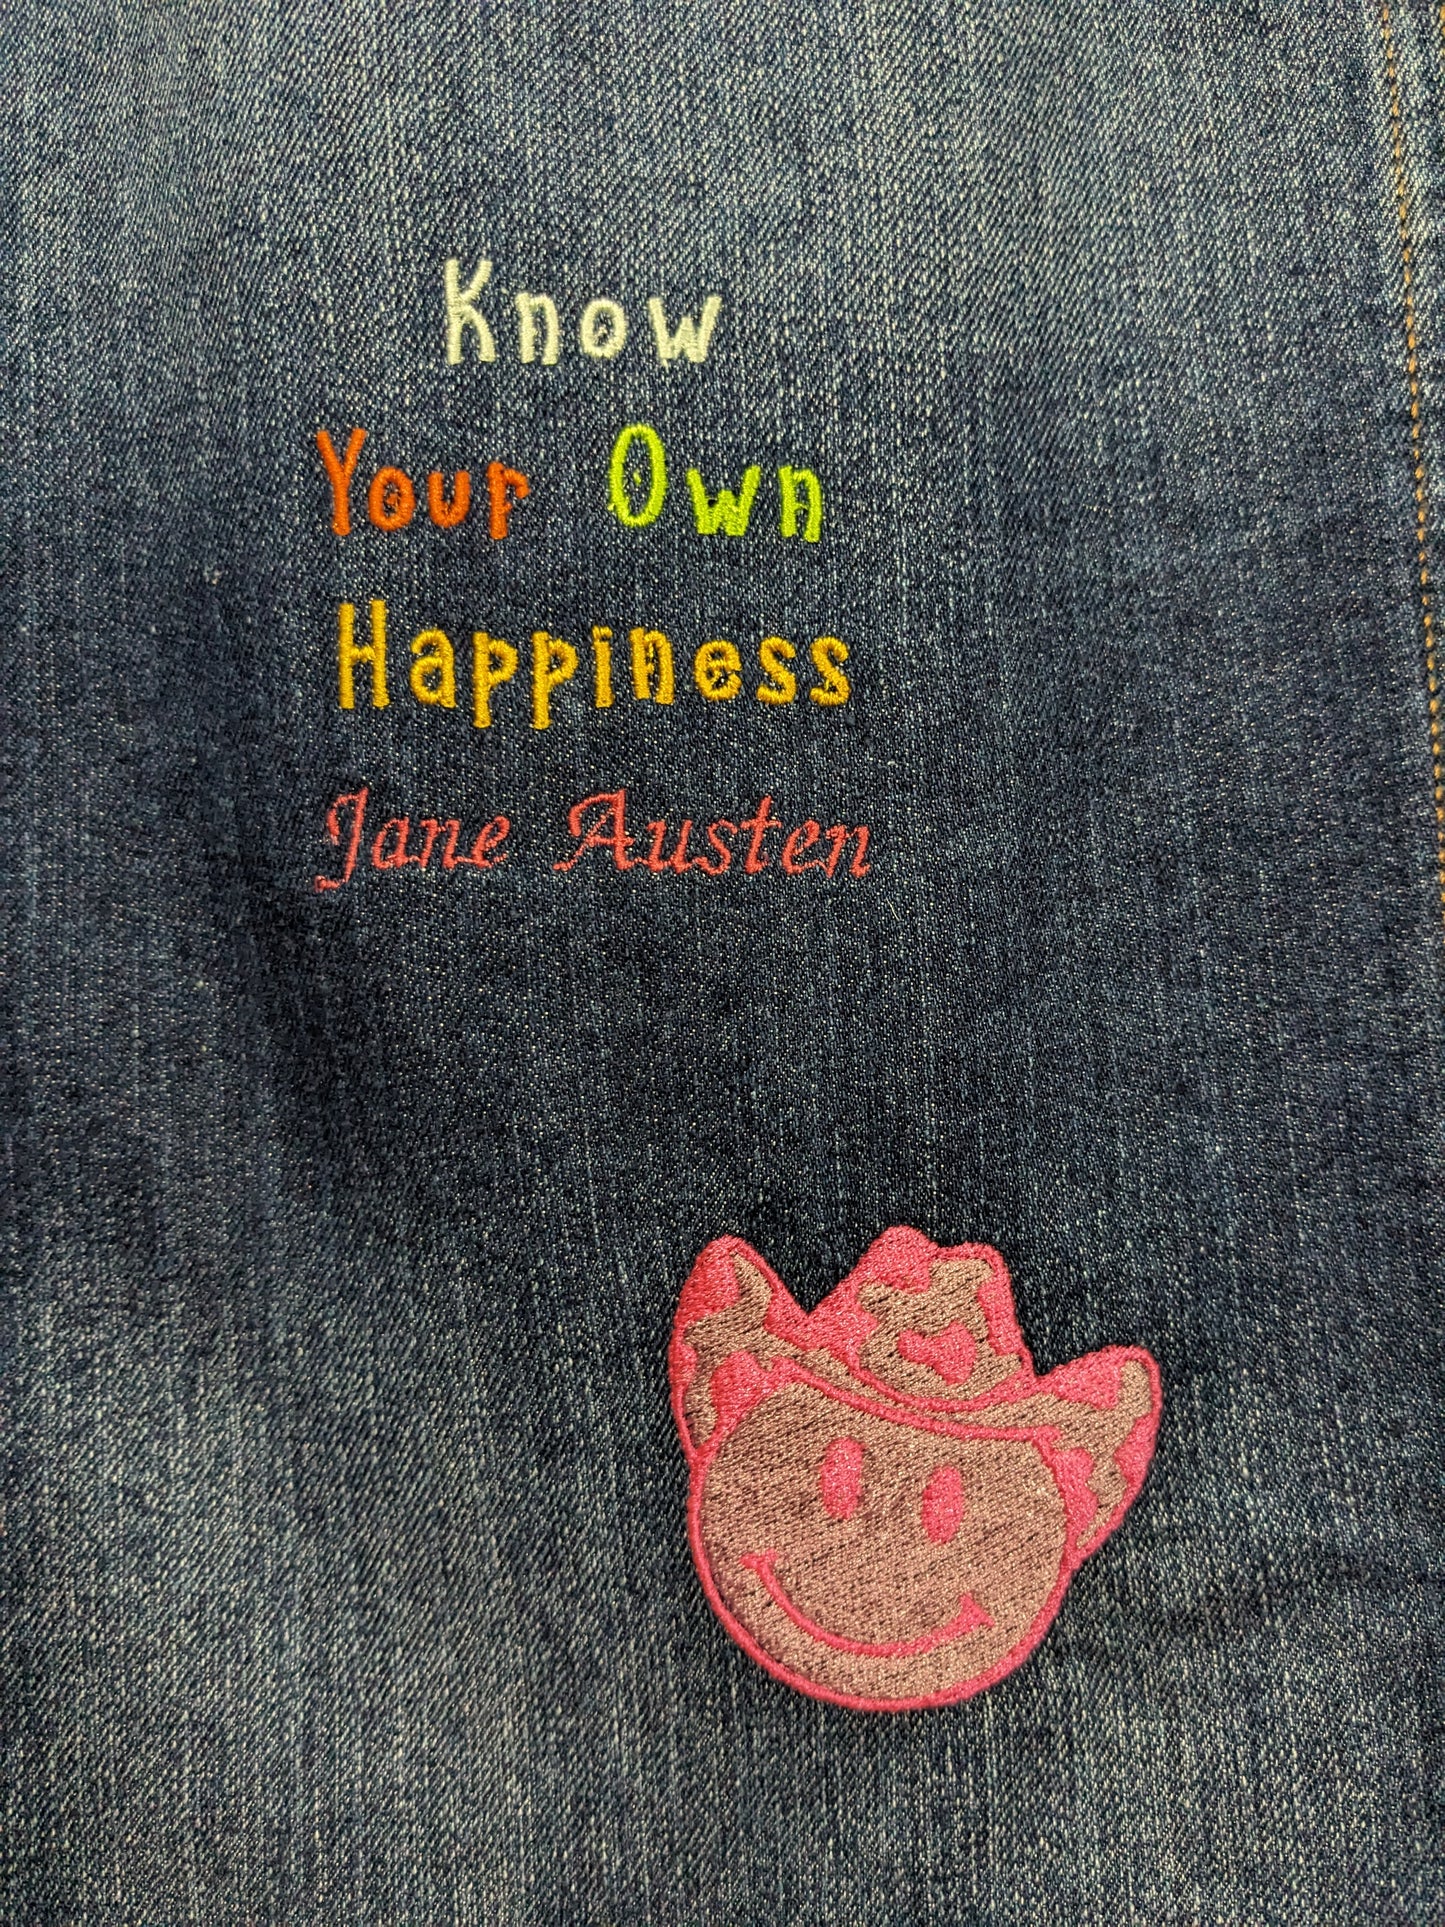 Size 16 Jane Austen Reworked Denim Jacket - Rainbow Embroidery - Cowboy Hat Detail - Know your own happiness